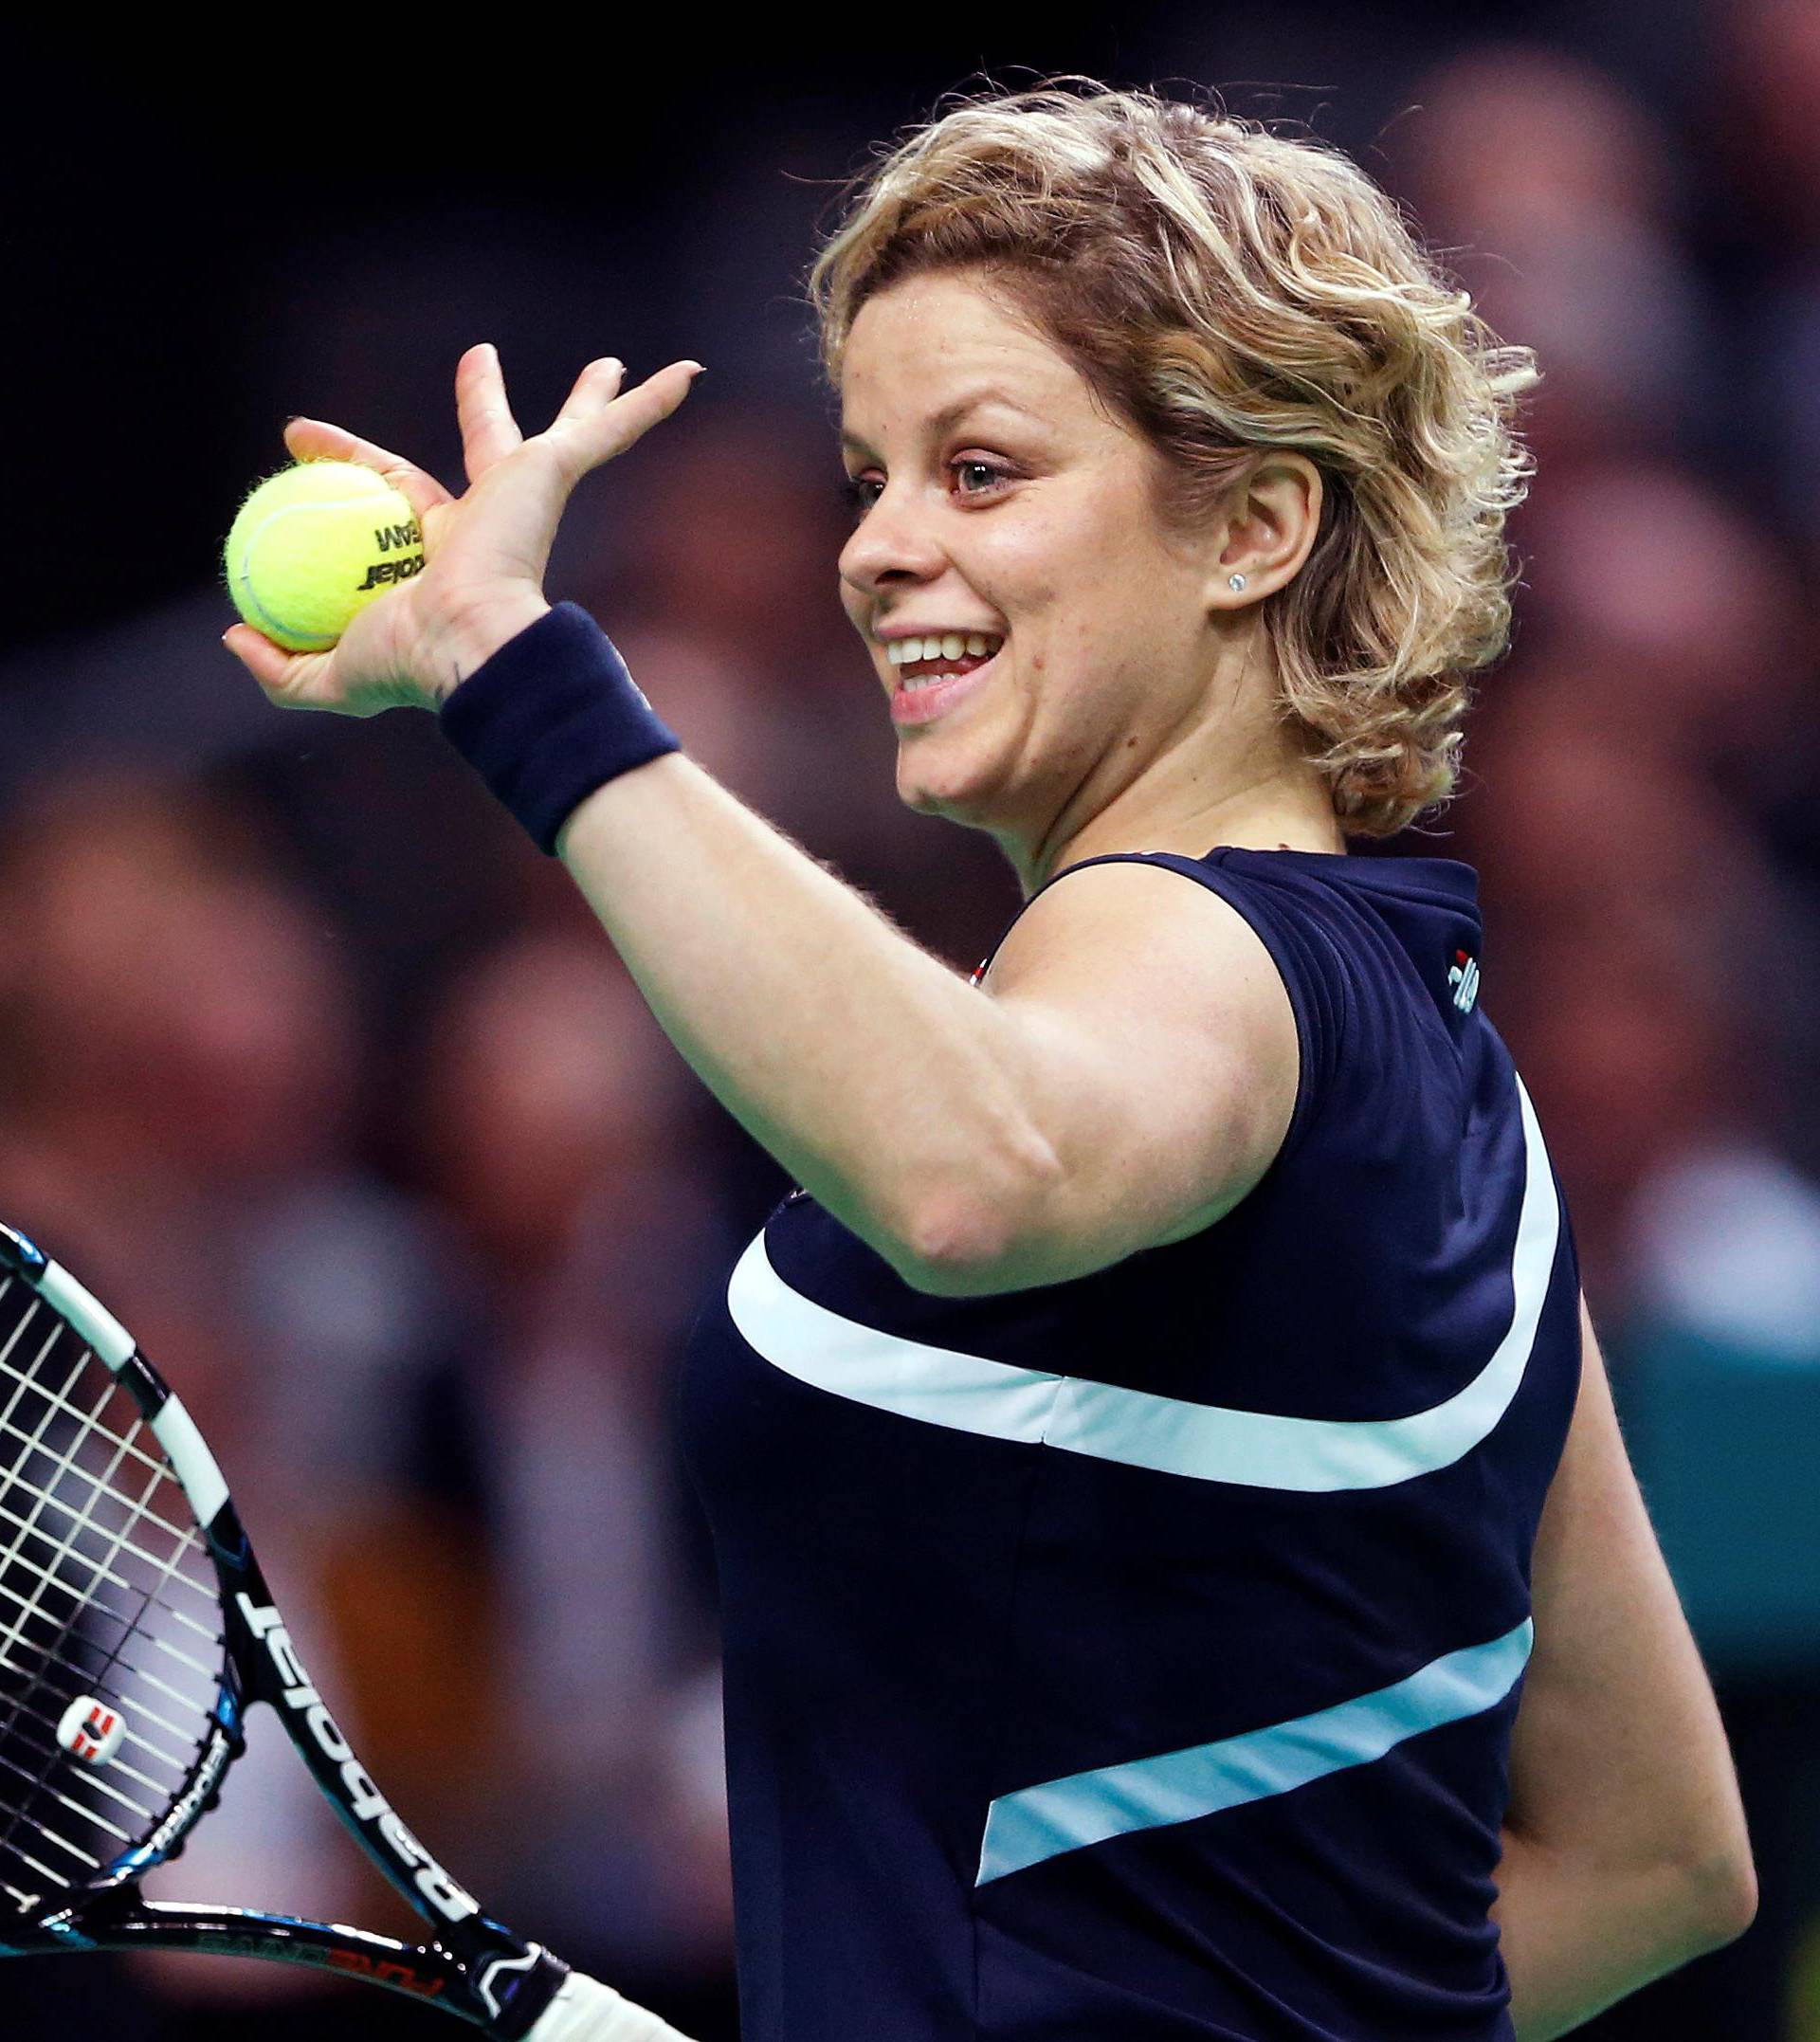 FILE PHOTO: Belgium's Clijsters waves to supporters during an exhibition tennis match to mark her retirement